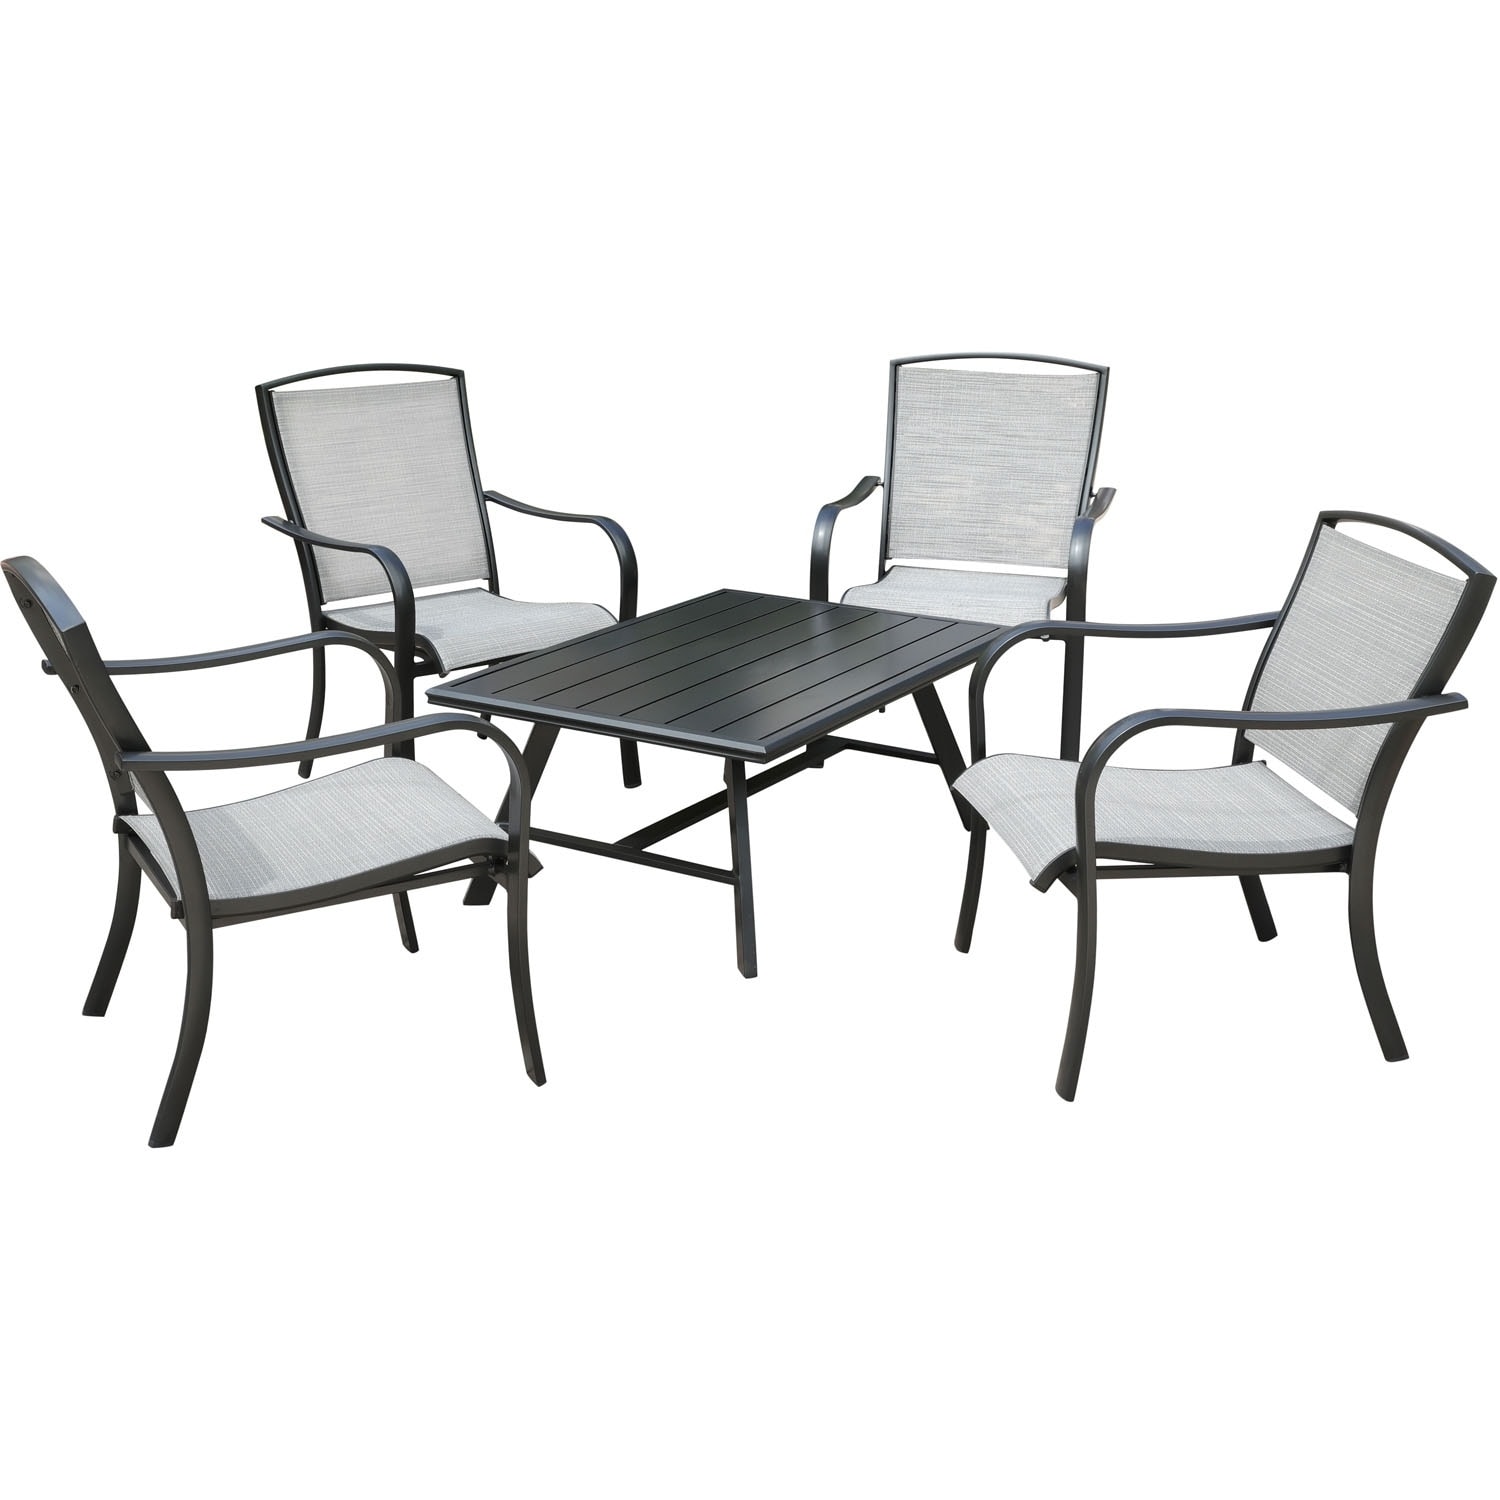 Hanover Foxhill 5-piece Commercial-grade Patio Seating Set With 4 Sling Lounge Chairs And A Slat-top Coffee Table